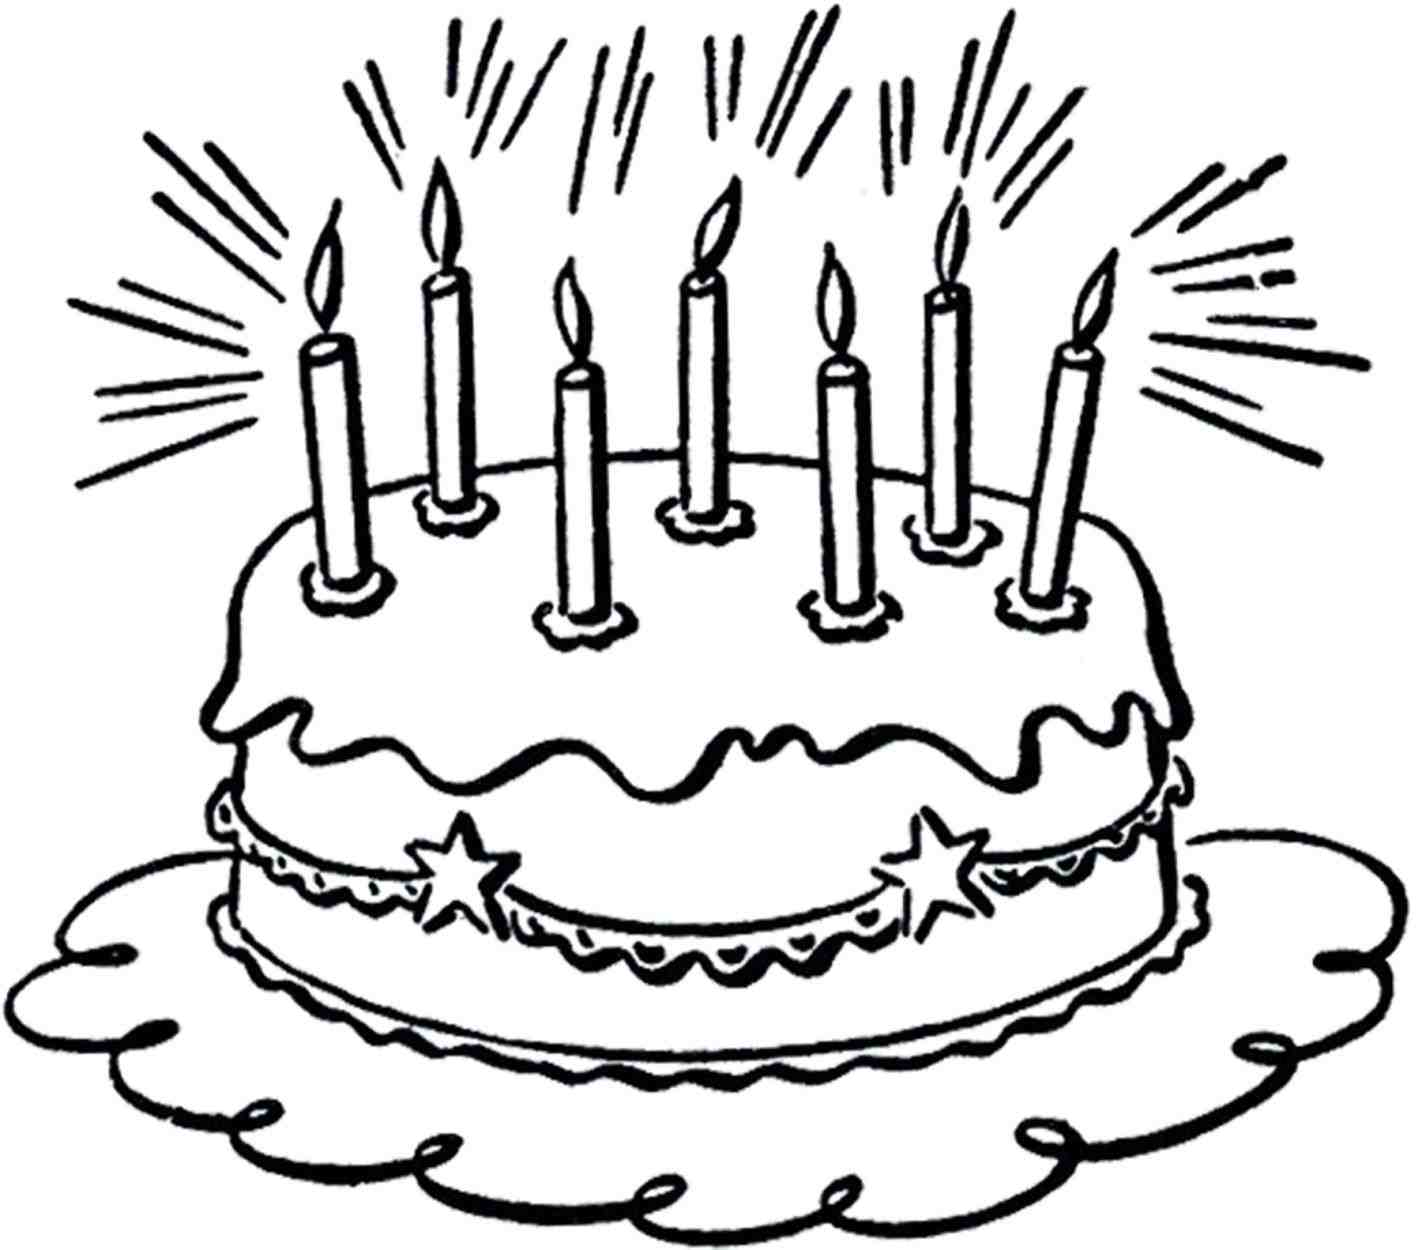 Cake clipart outline. Birthday pencil drawing at